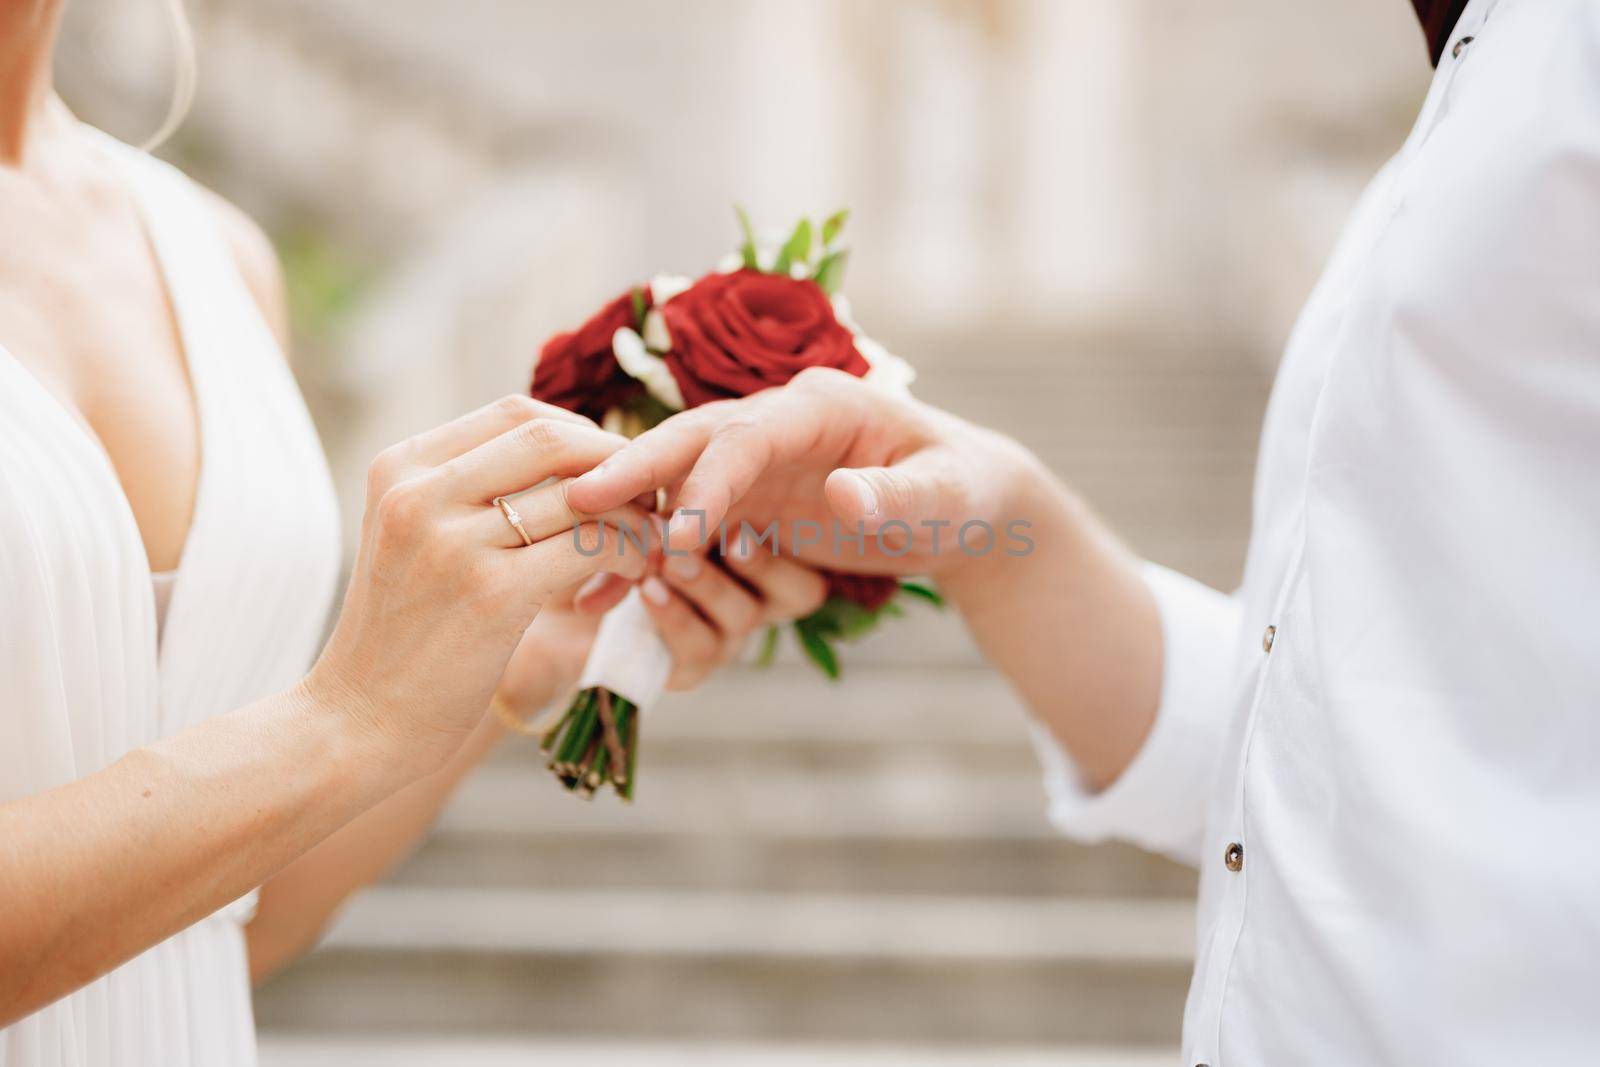 The bride puts a wedding ring on the groom's finger and holds a bouquet of red and white roses in her hand . High quality photo